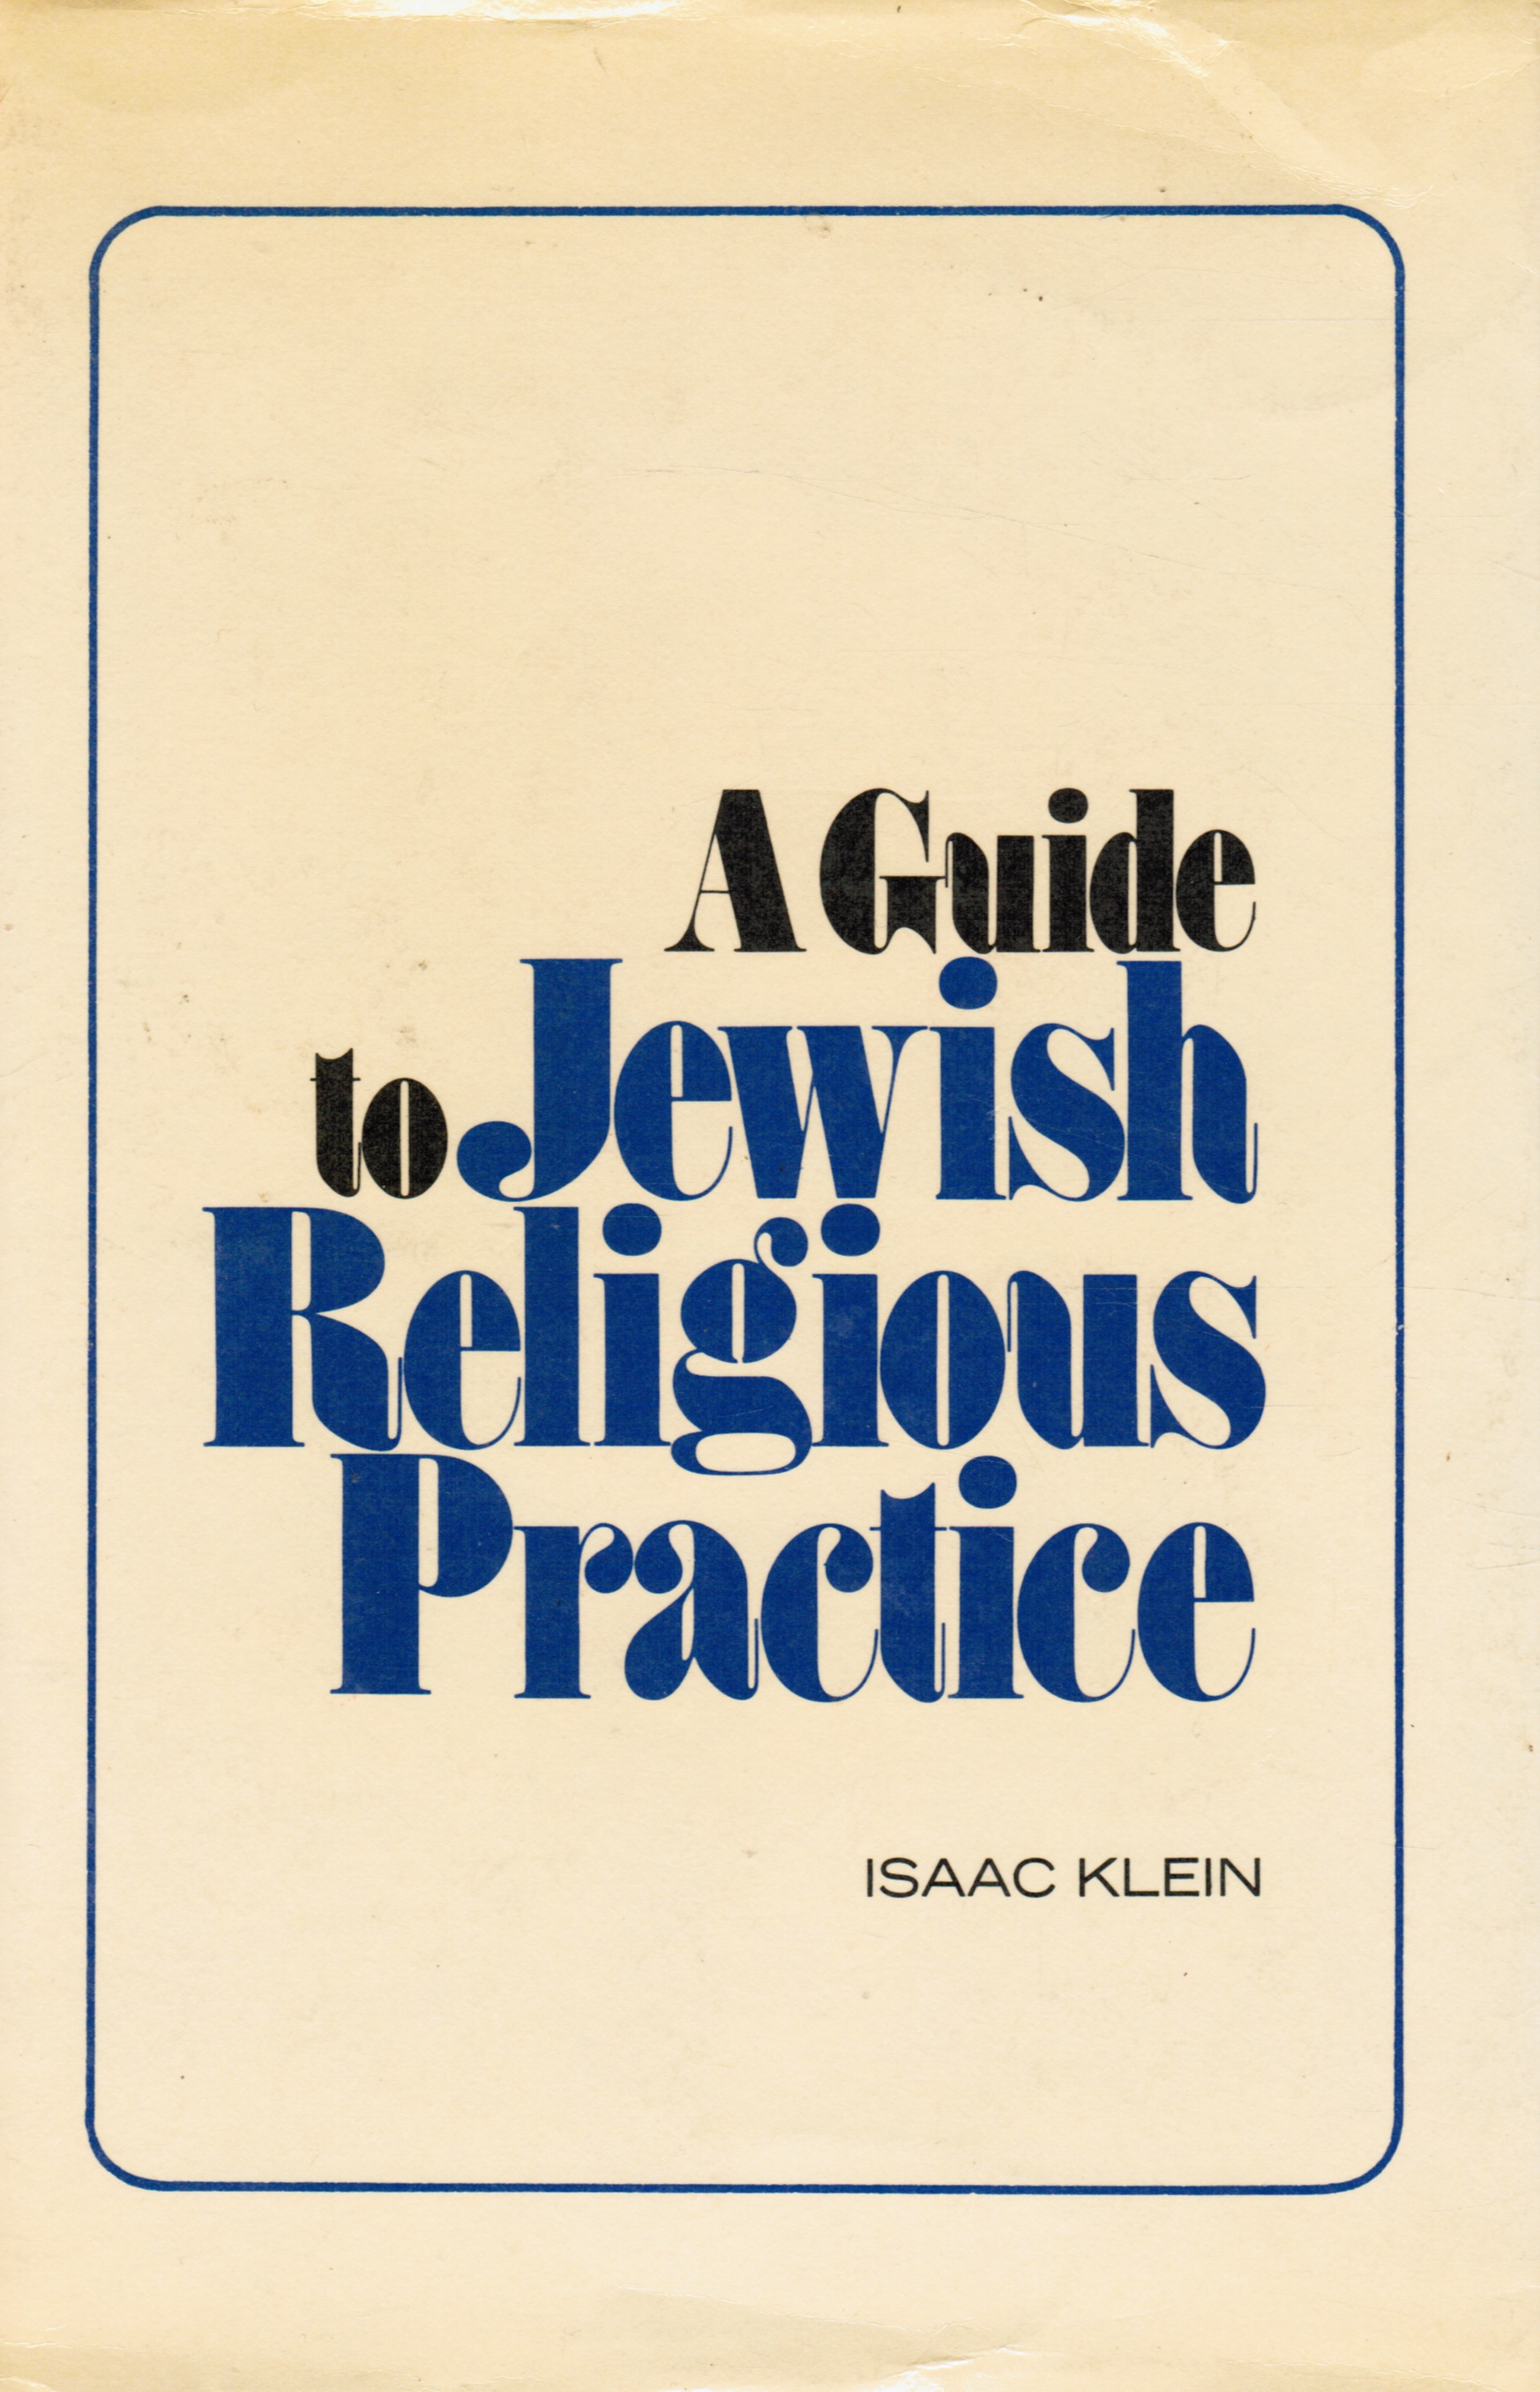 KLEIN, ISAAC - A Guide to Jewish Religious Practice